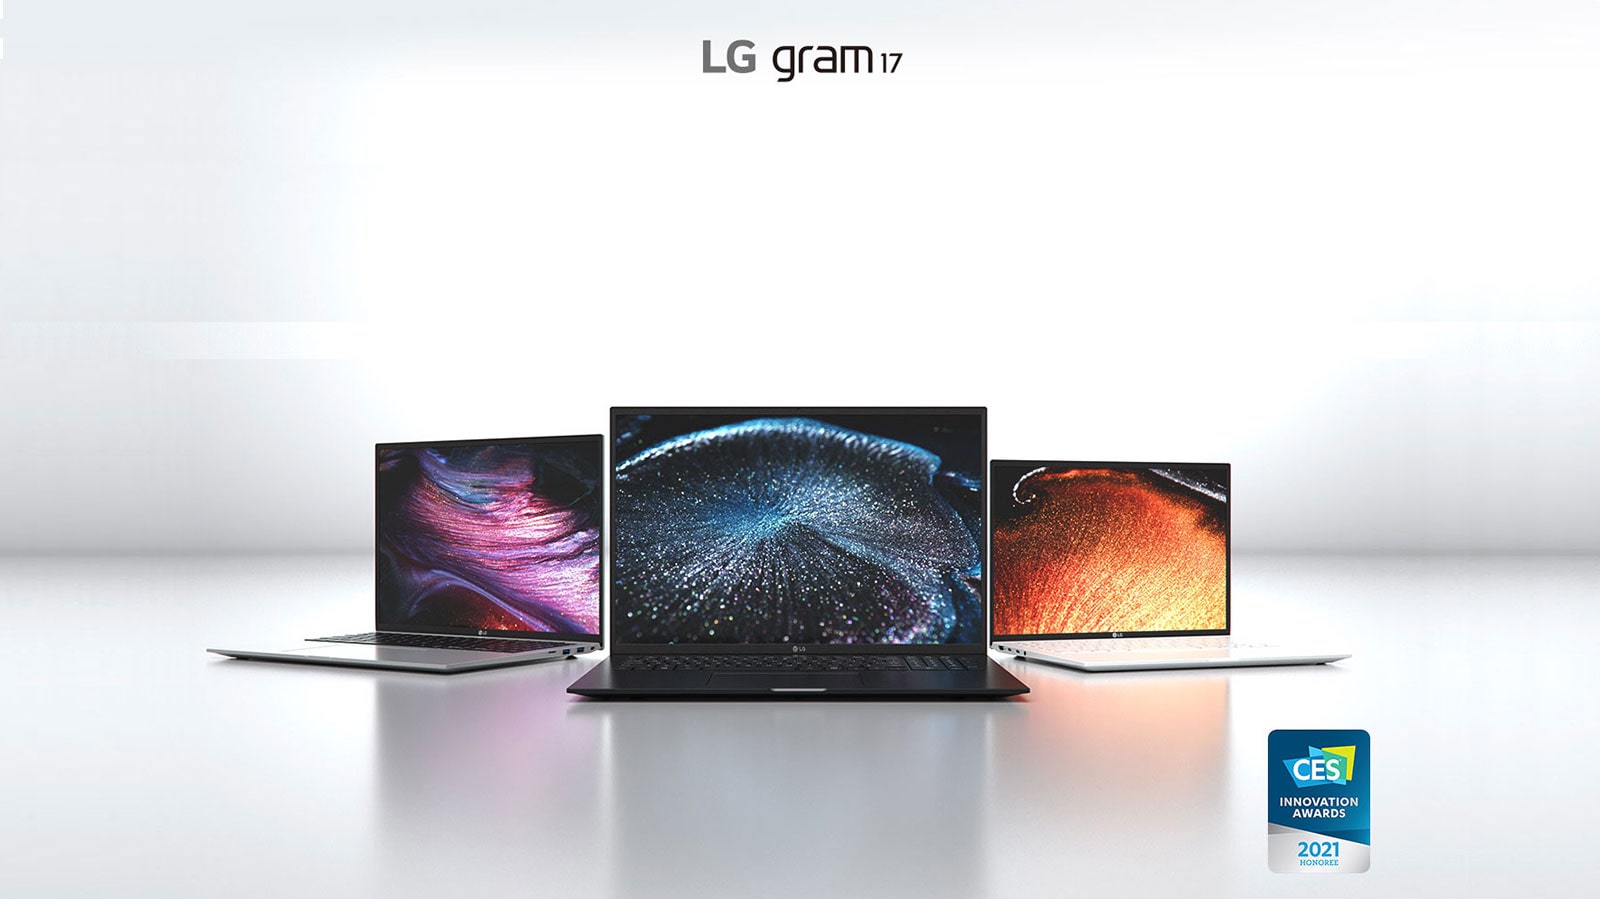 LG gram 16 offering all features including light-weight as ever